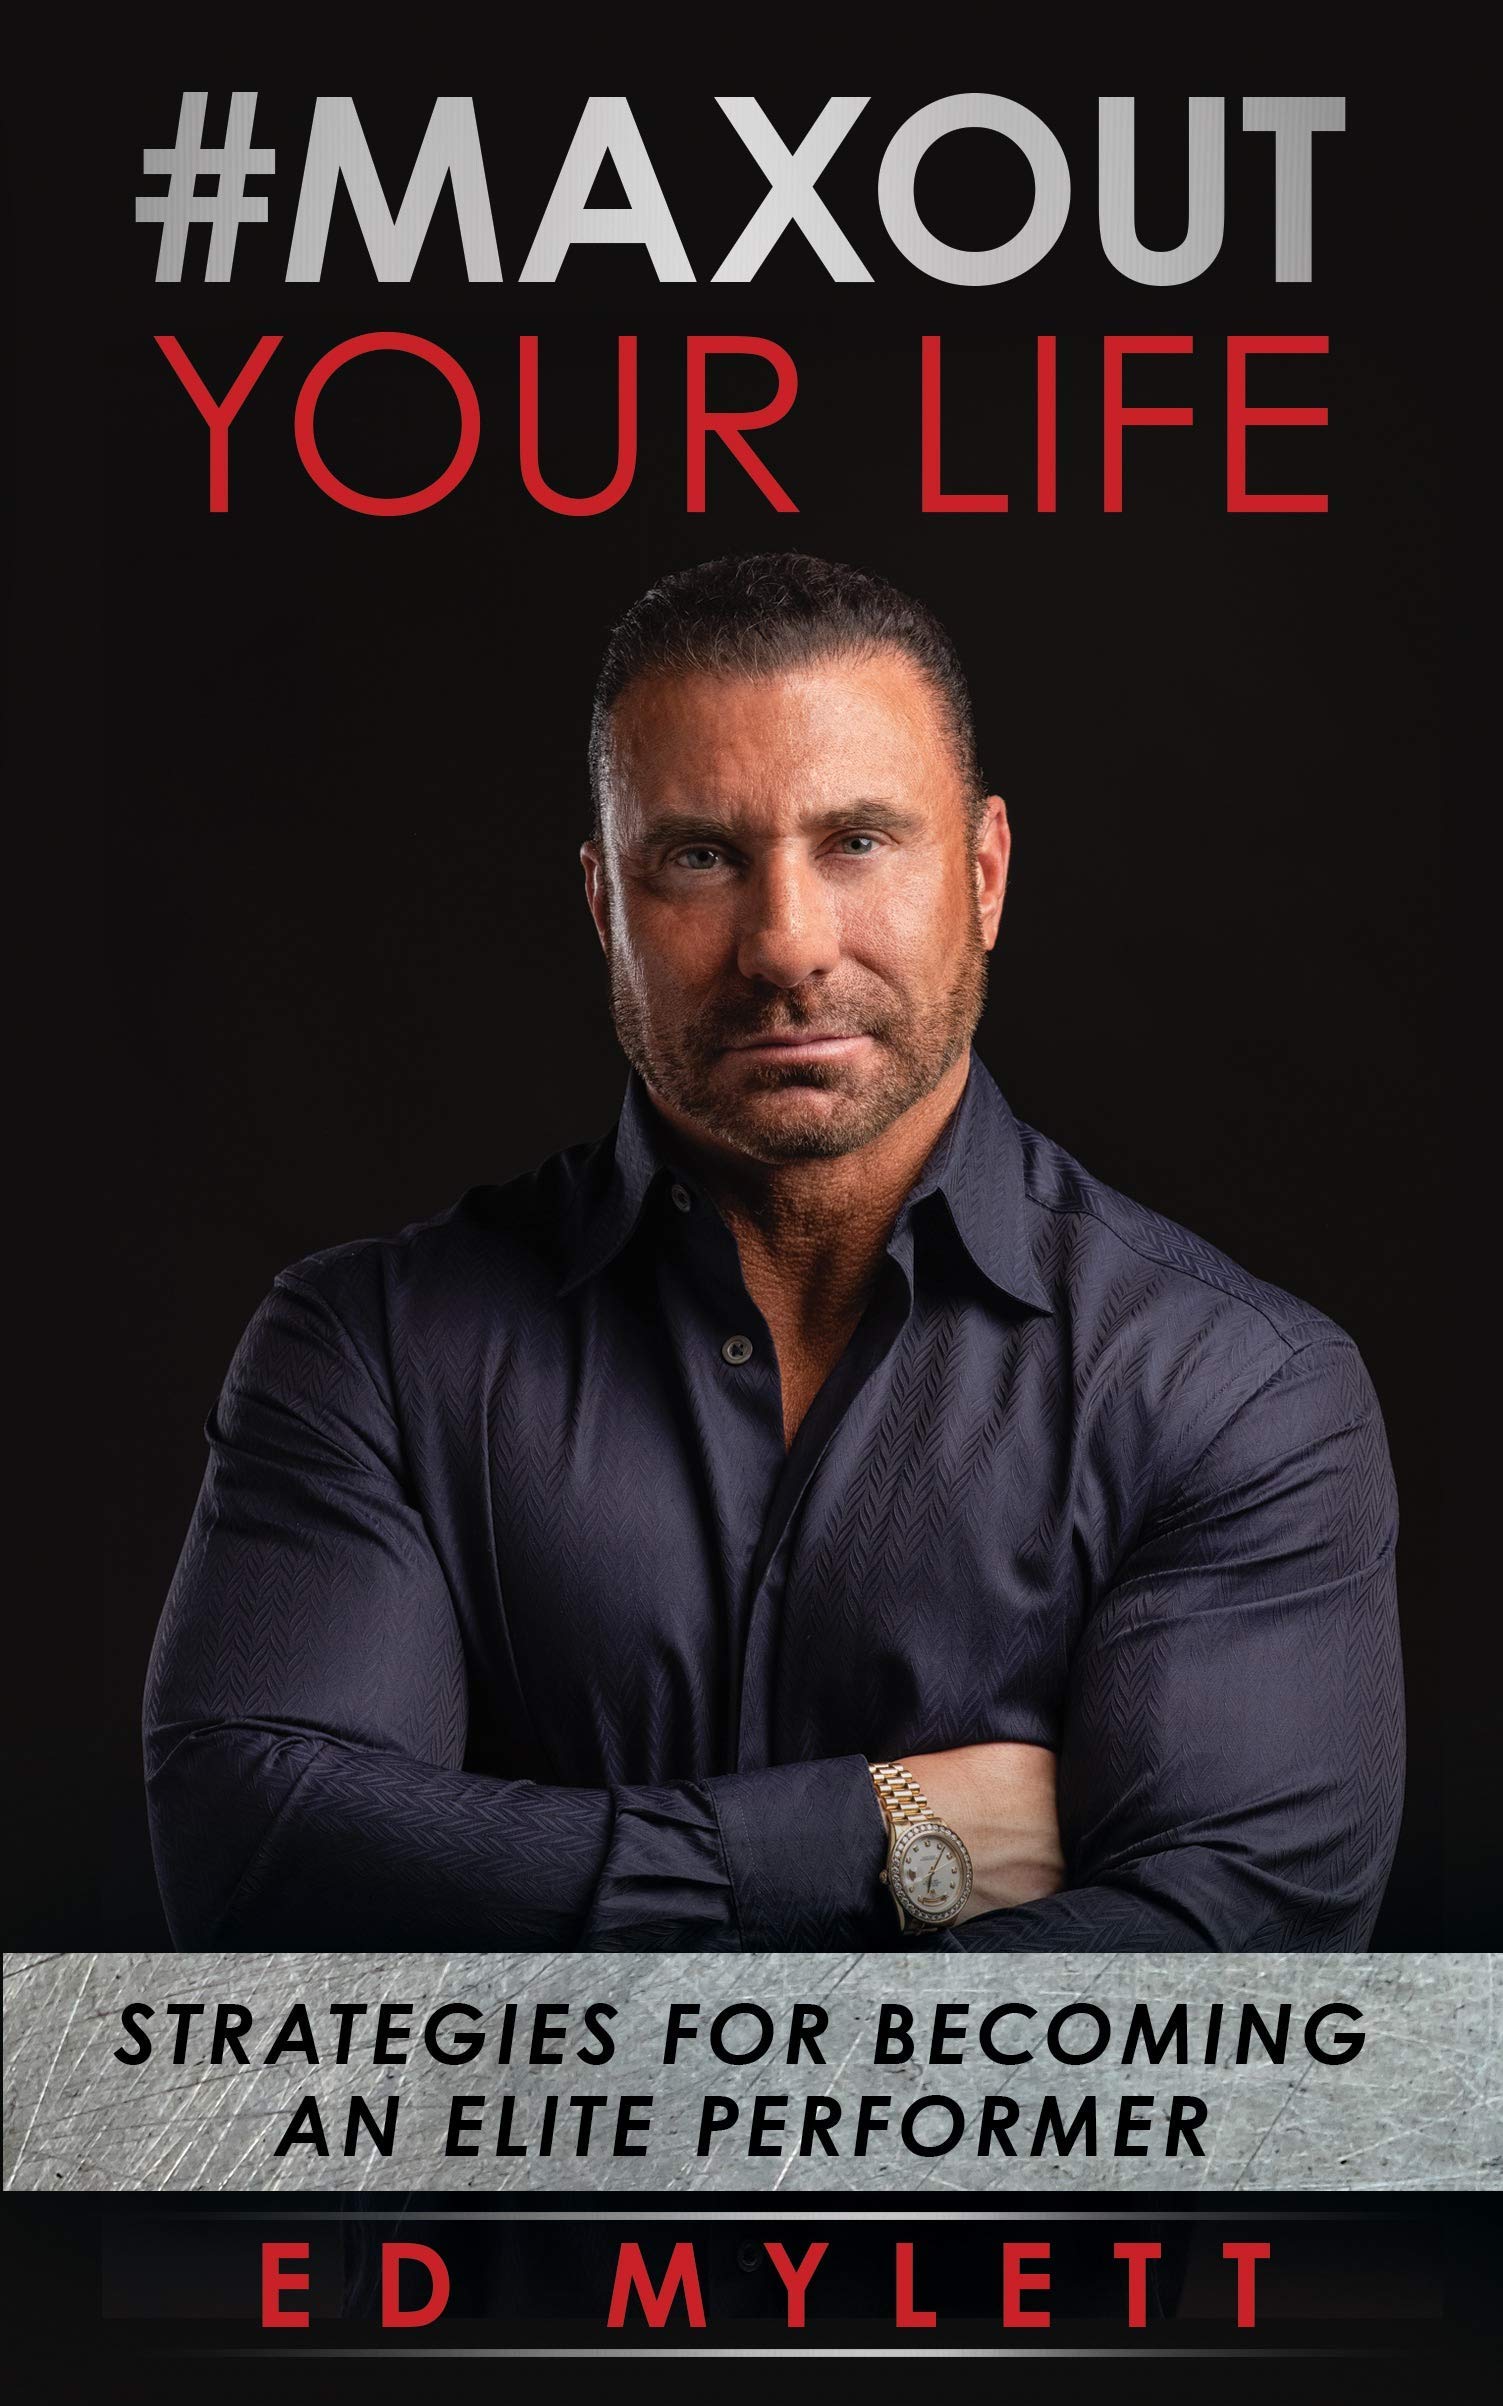 Book Cover #Max Out Your Life: Strategies for Becoming an Elite Performer